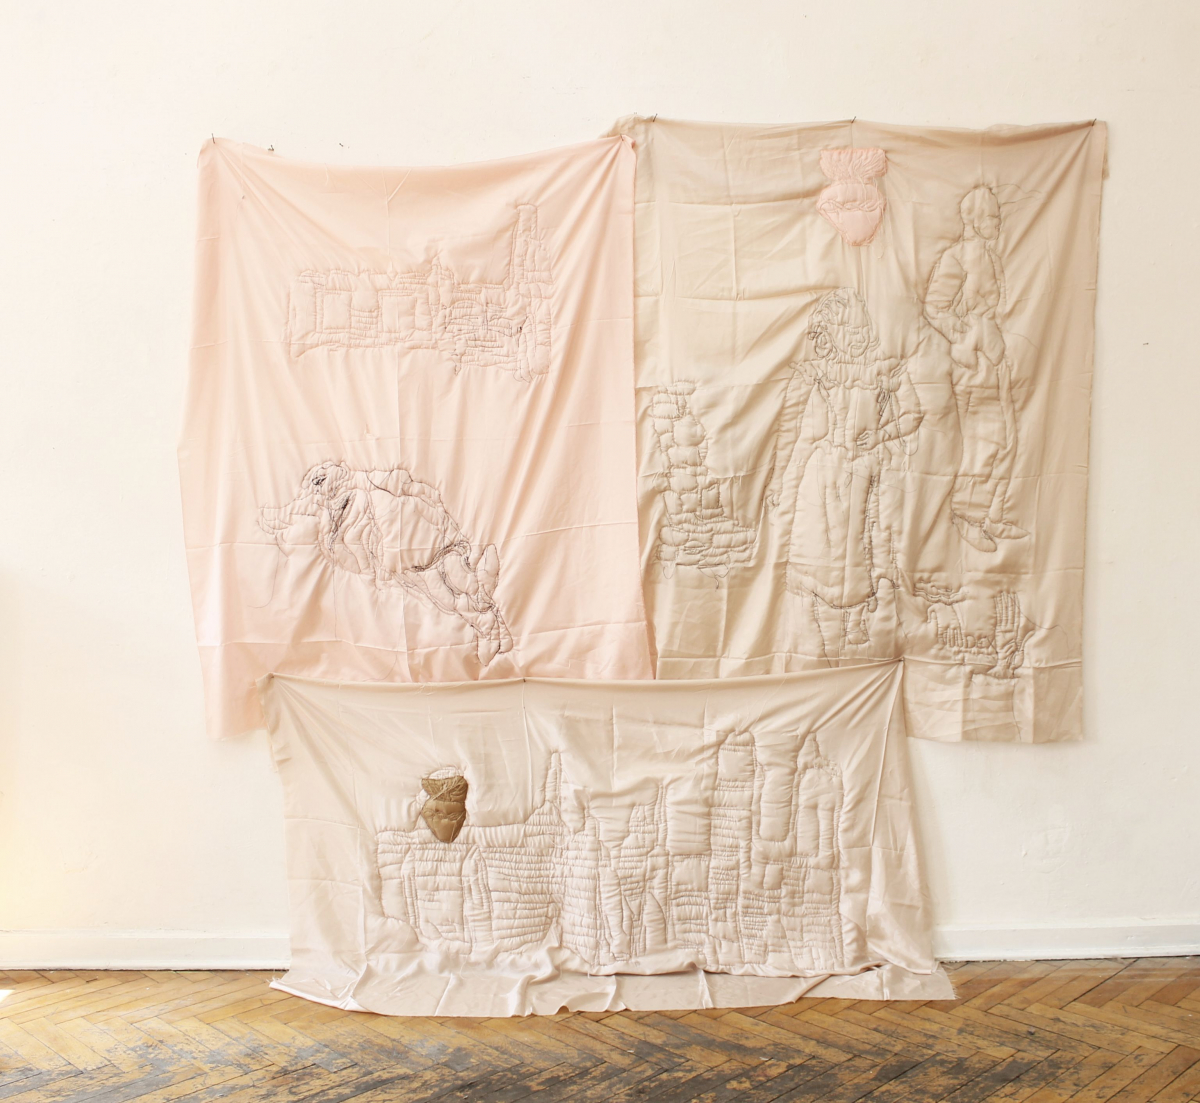 KAROLINA LIZUREJ (PL), Hearts in ruins, 2022, 200 × 200 cm, hand embroidery on the satin lining, textile installation, loan from the author